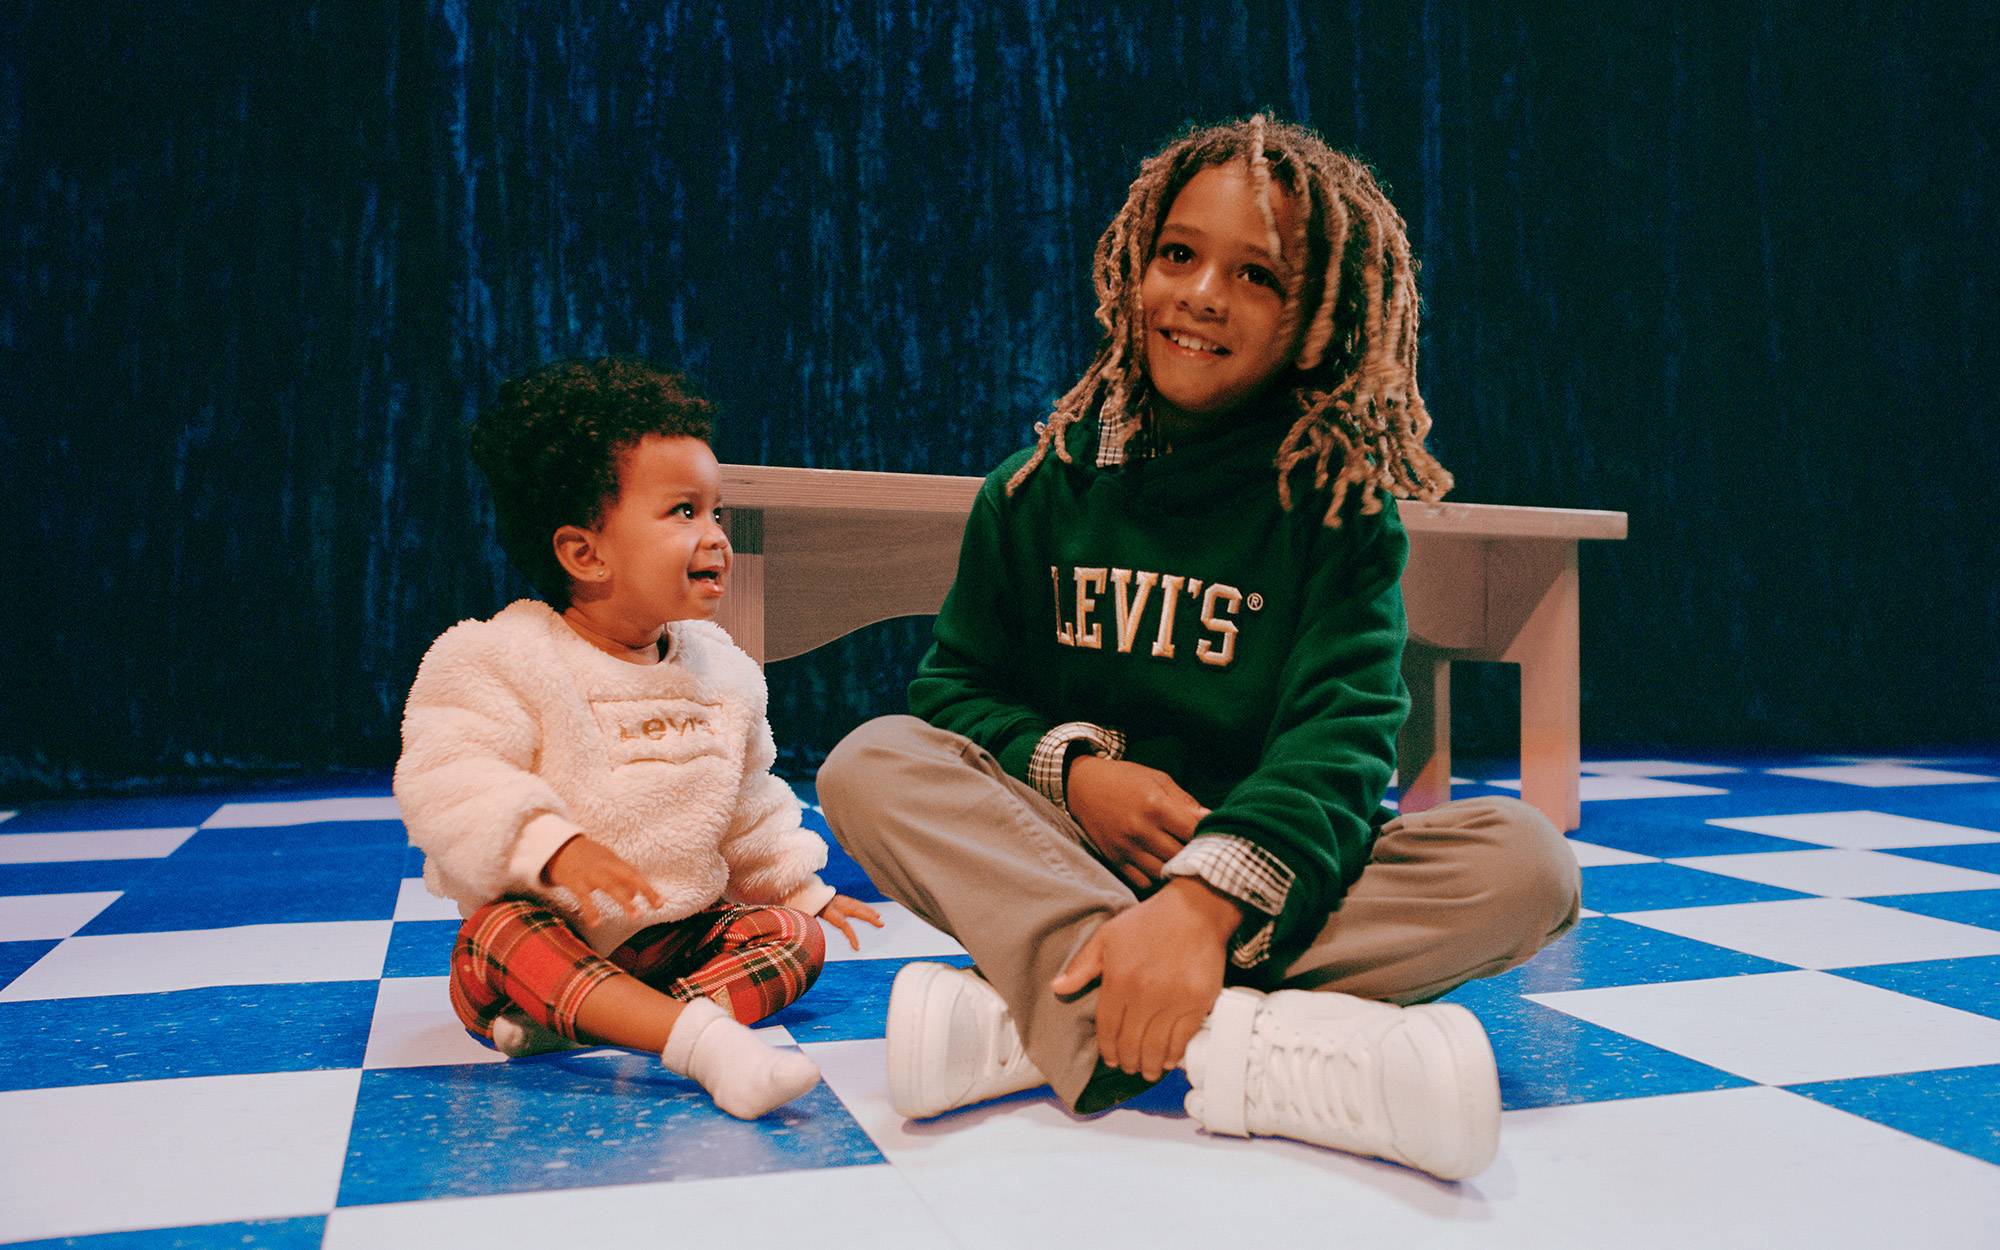 Two siblings (a baby and little boy) sitting on the floor together wearing Levi's seasonal product for the holiday.